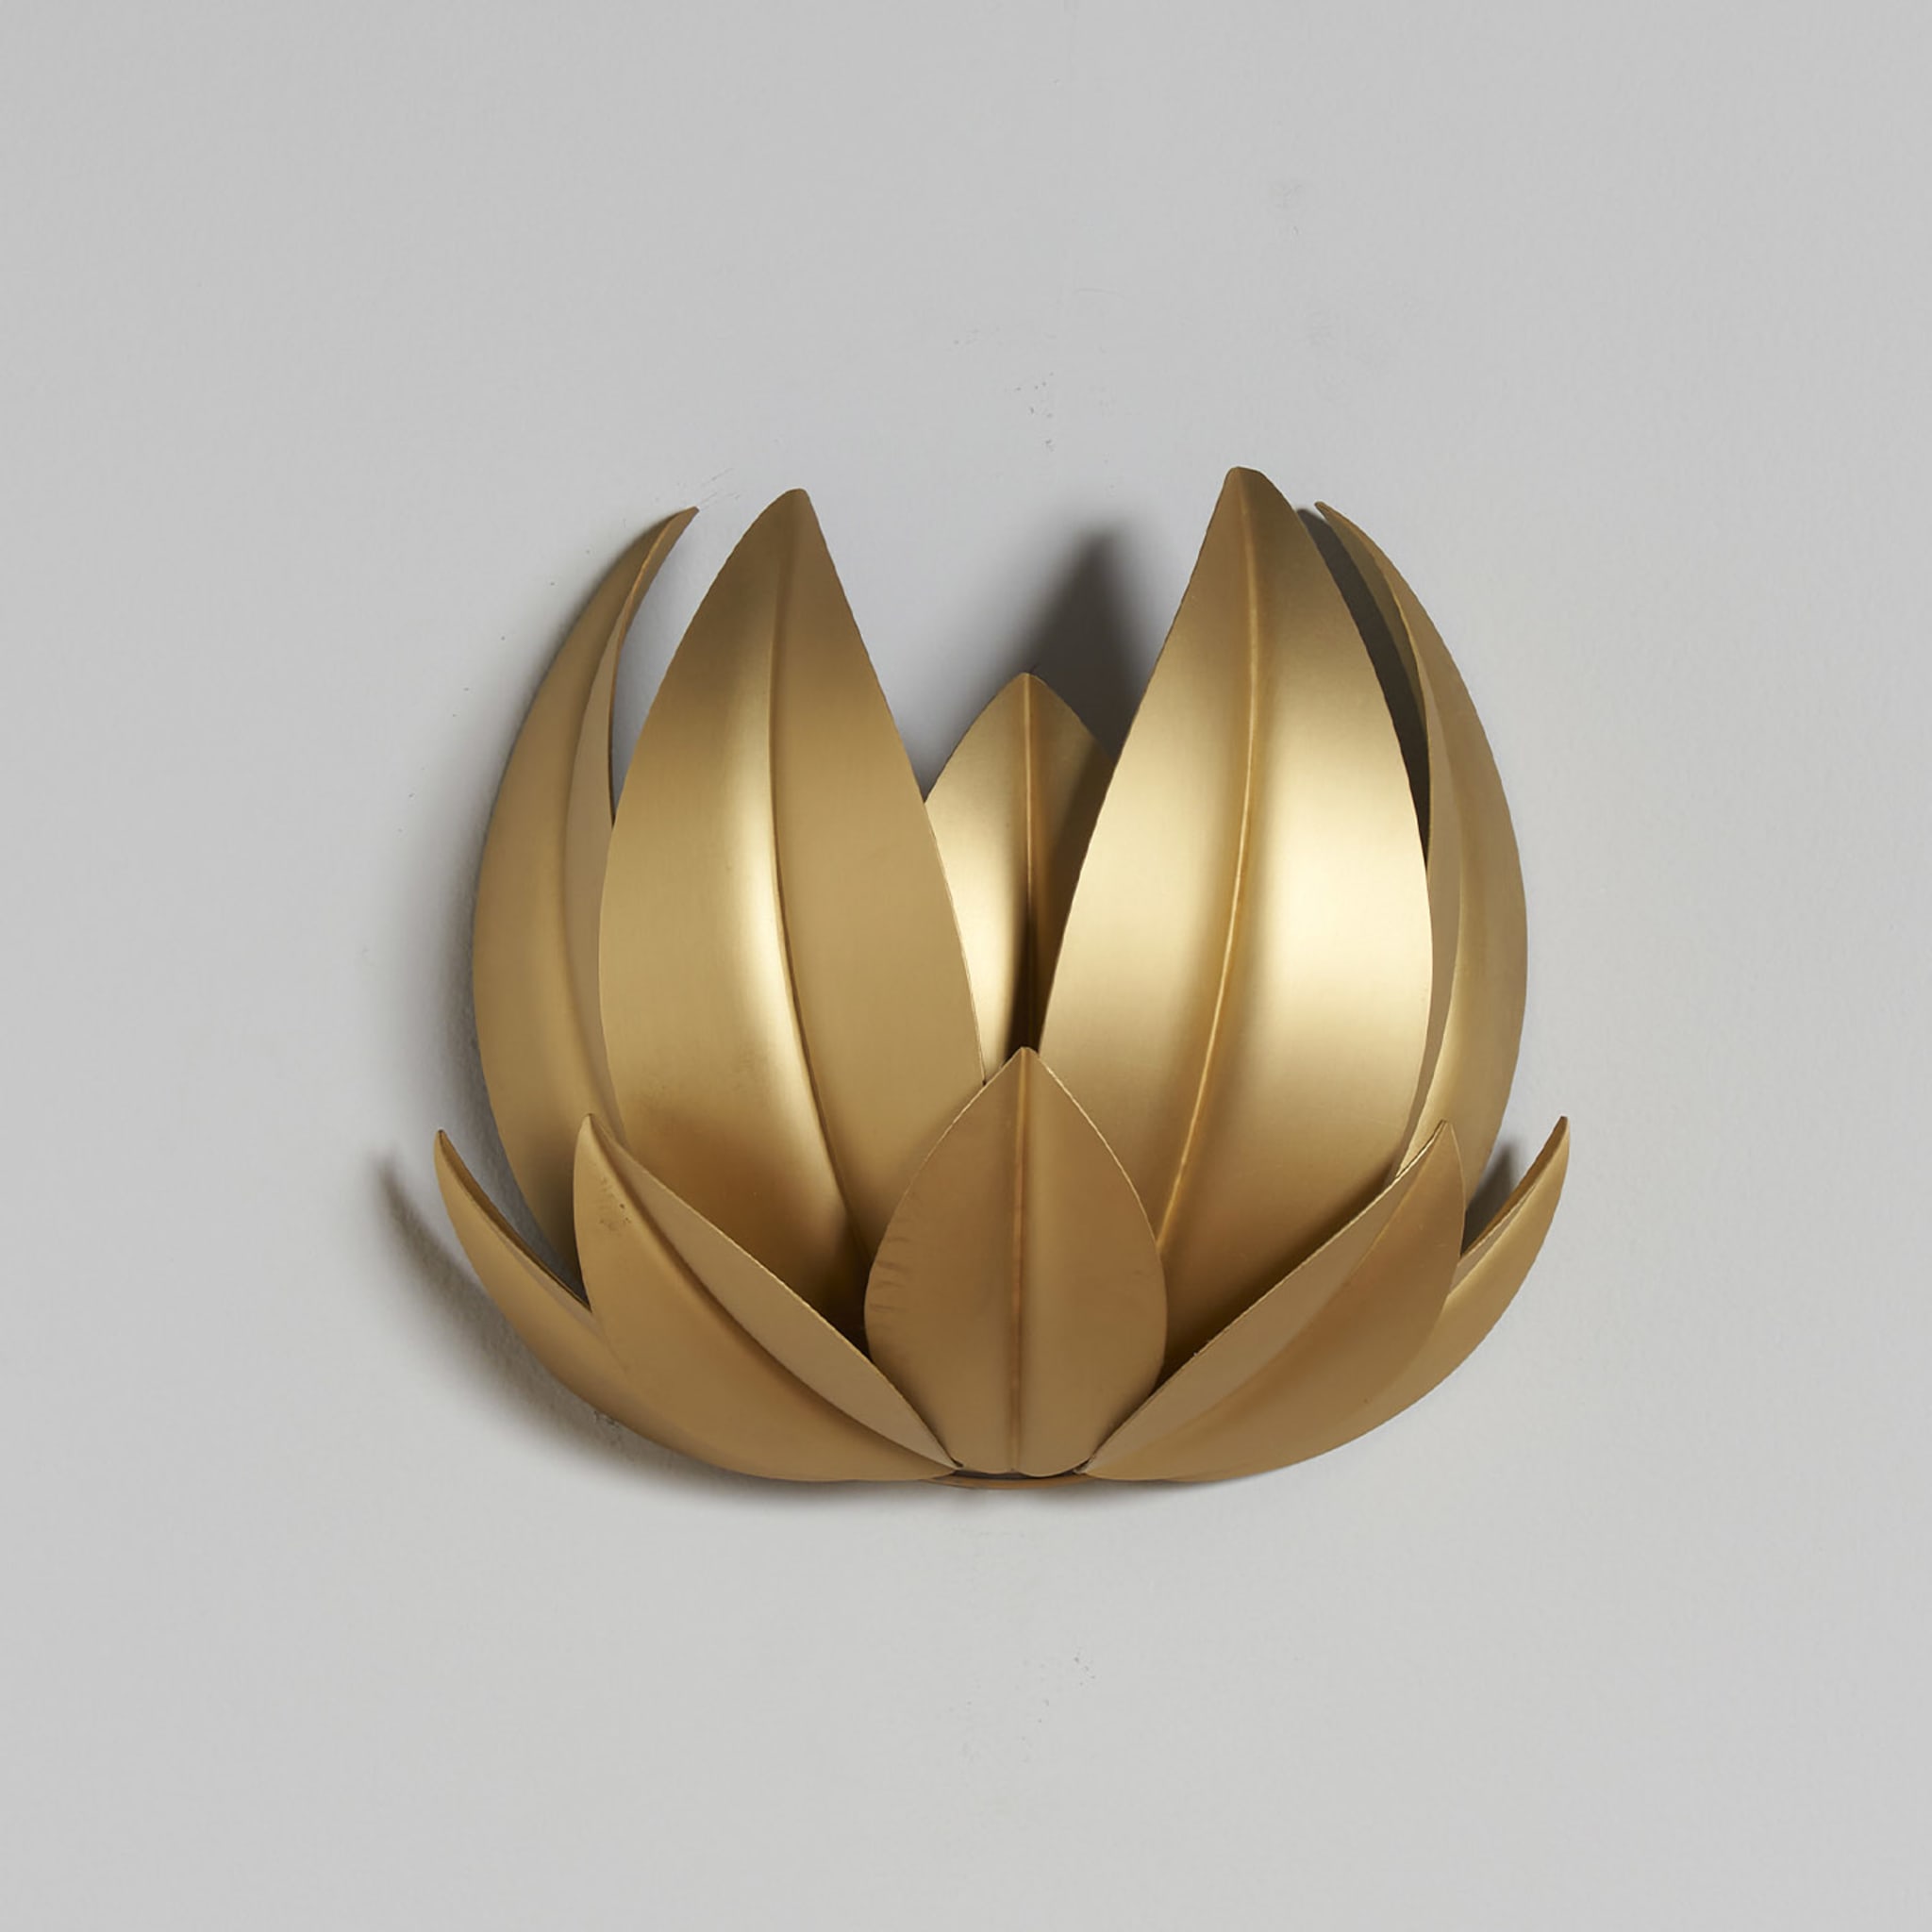 "Leaves" Wall Sconce in Satin Brass by Droulers Architecture - Alternative view 2